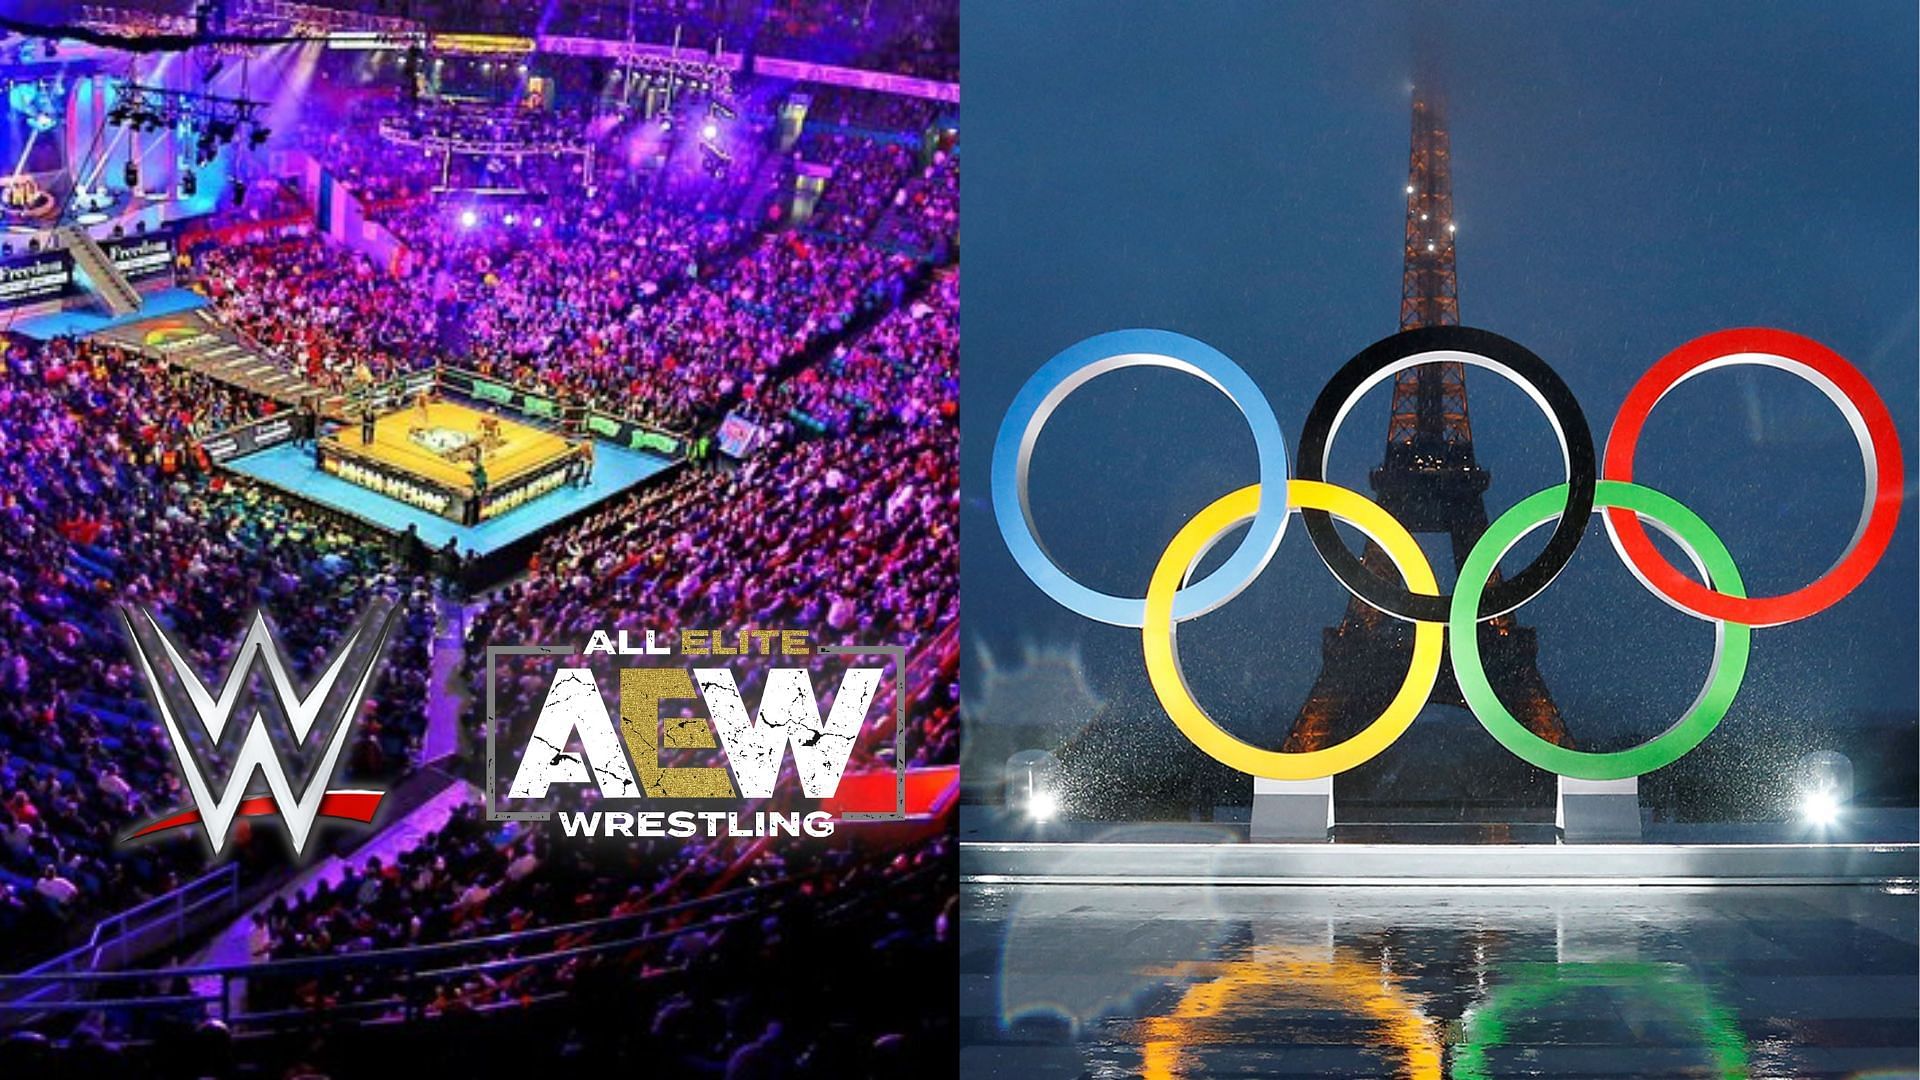 Can Pro-wrestling be an Olympic sport?